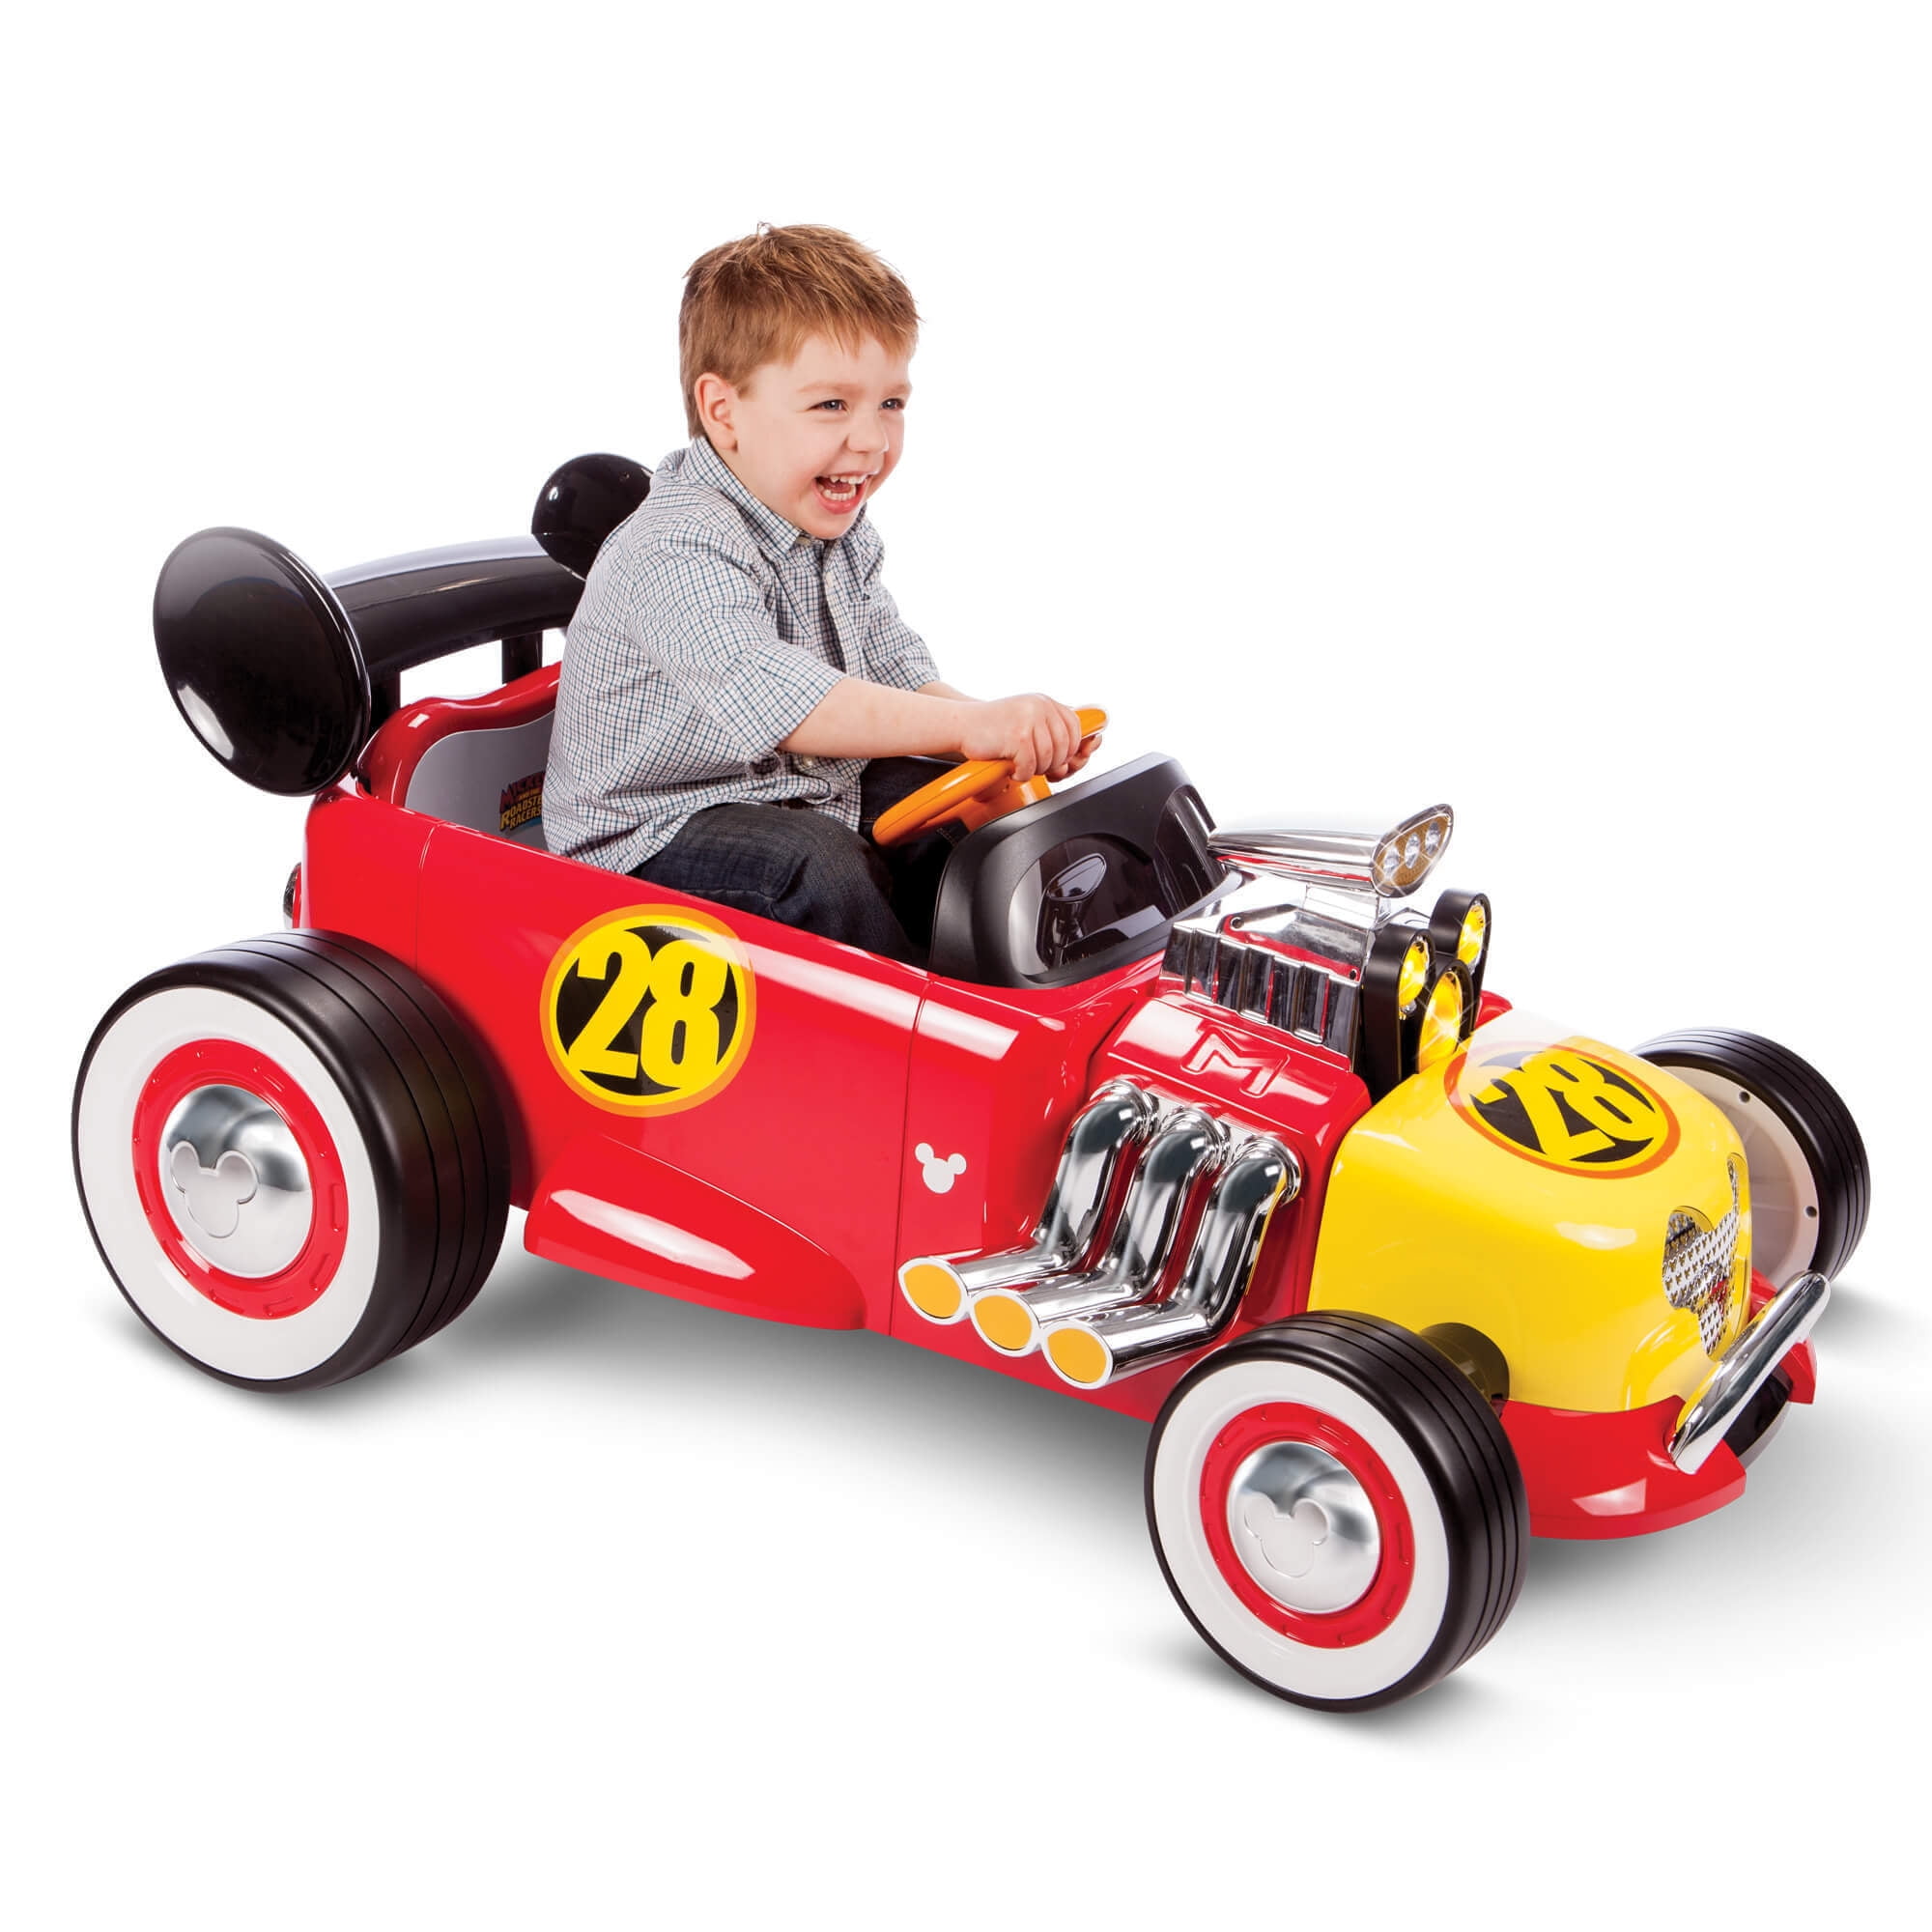 Disney Mickey Roadster Racer 6-Volt Battery-Powered Ride On by Huffy